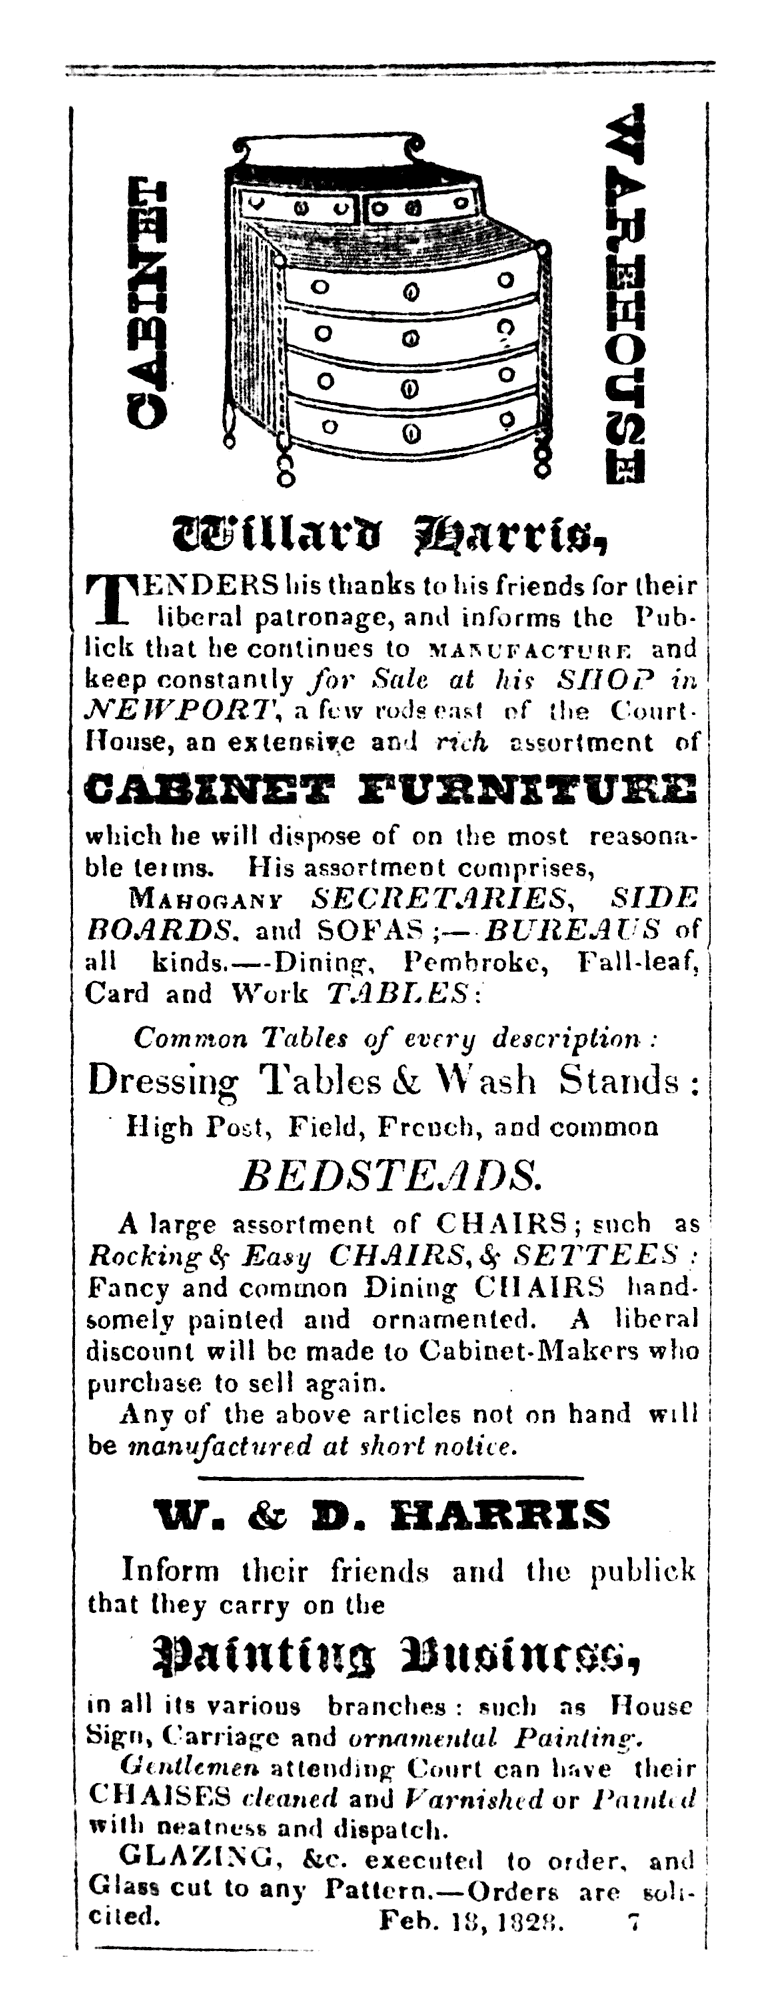 Advertisement placed by Harris in Newport’s New-Hampshire Spectator